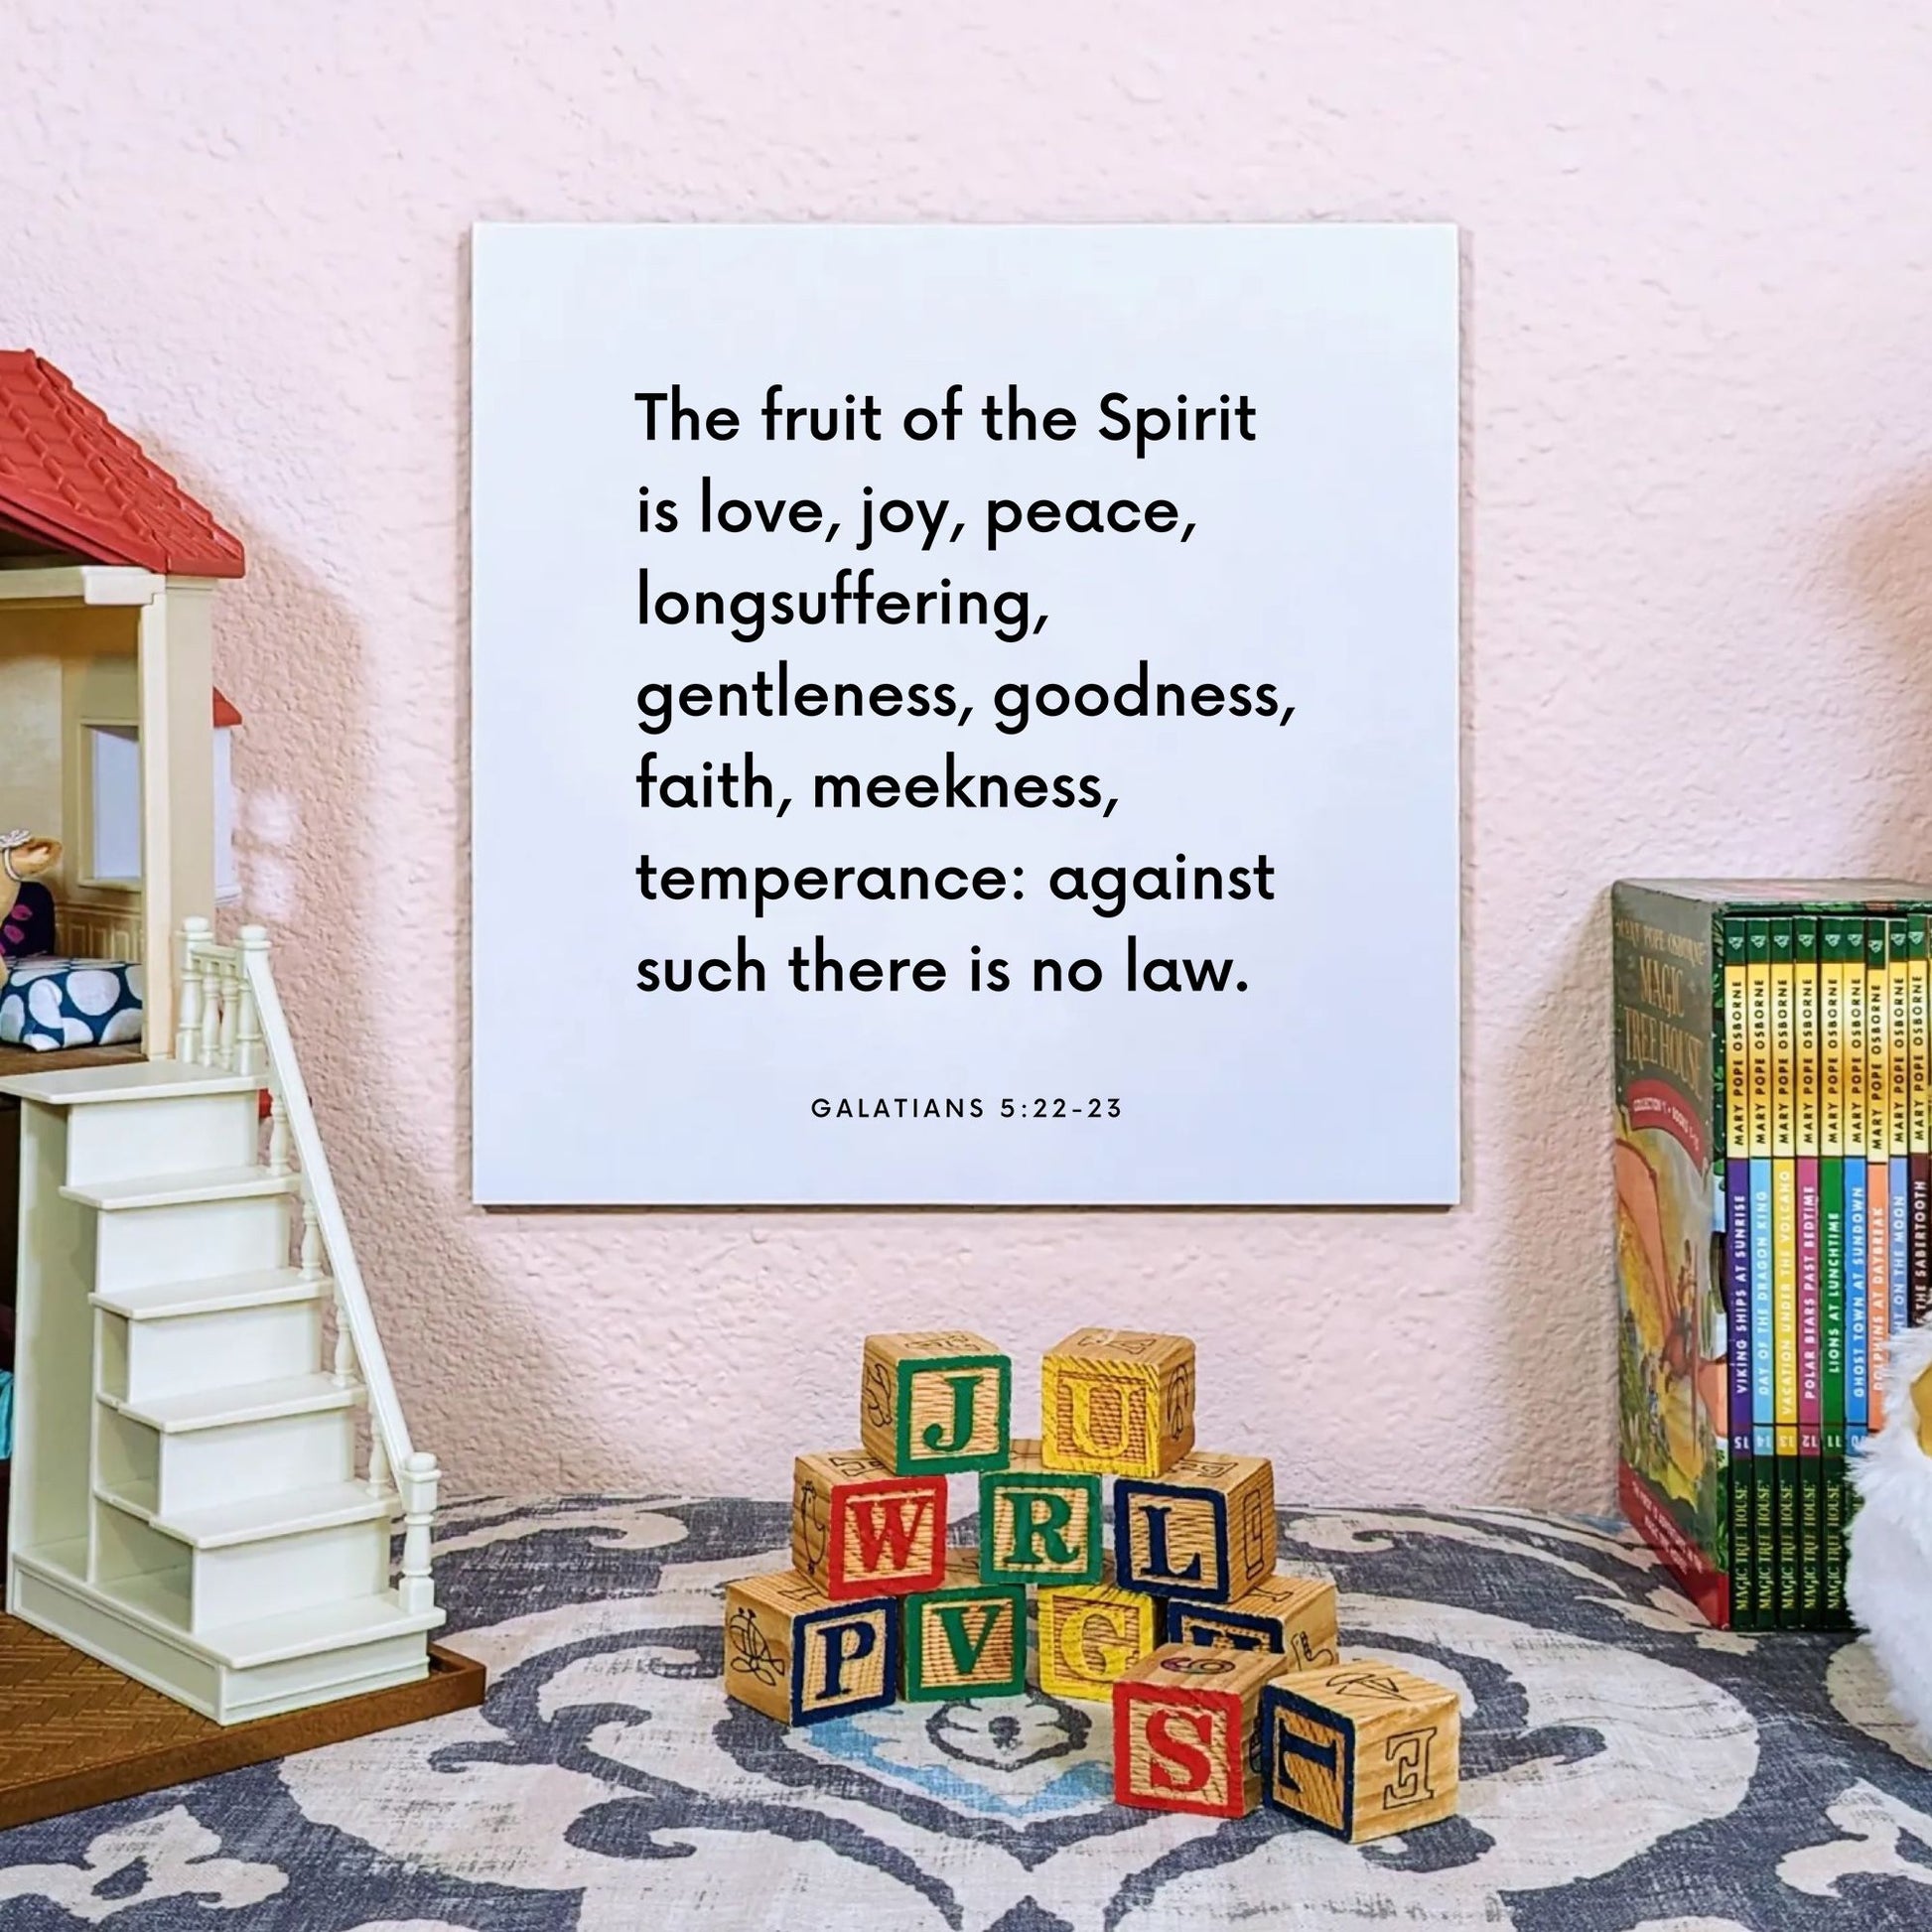 Playroom mouting of the scripture tile for Galatians 5:22-23 - "The fruit of the Spirit is love, joy, peace"